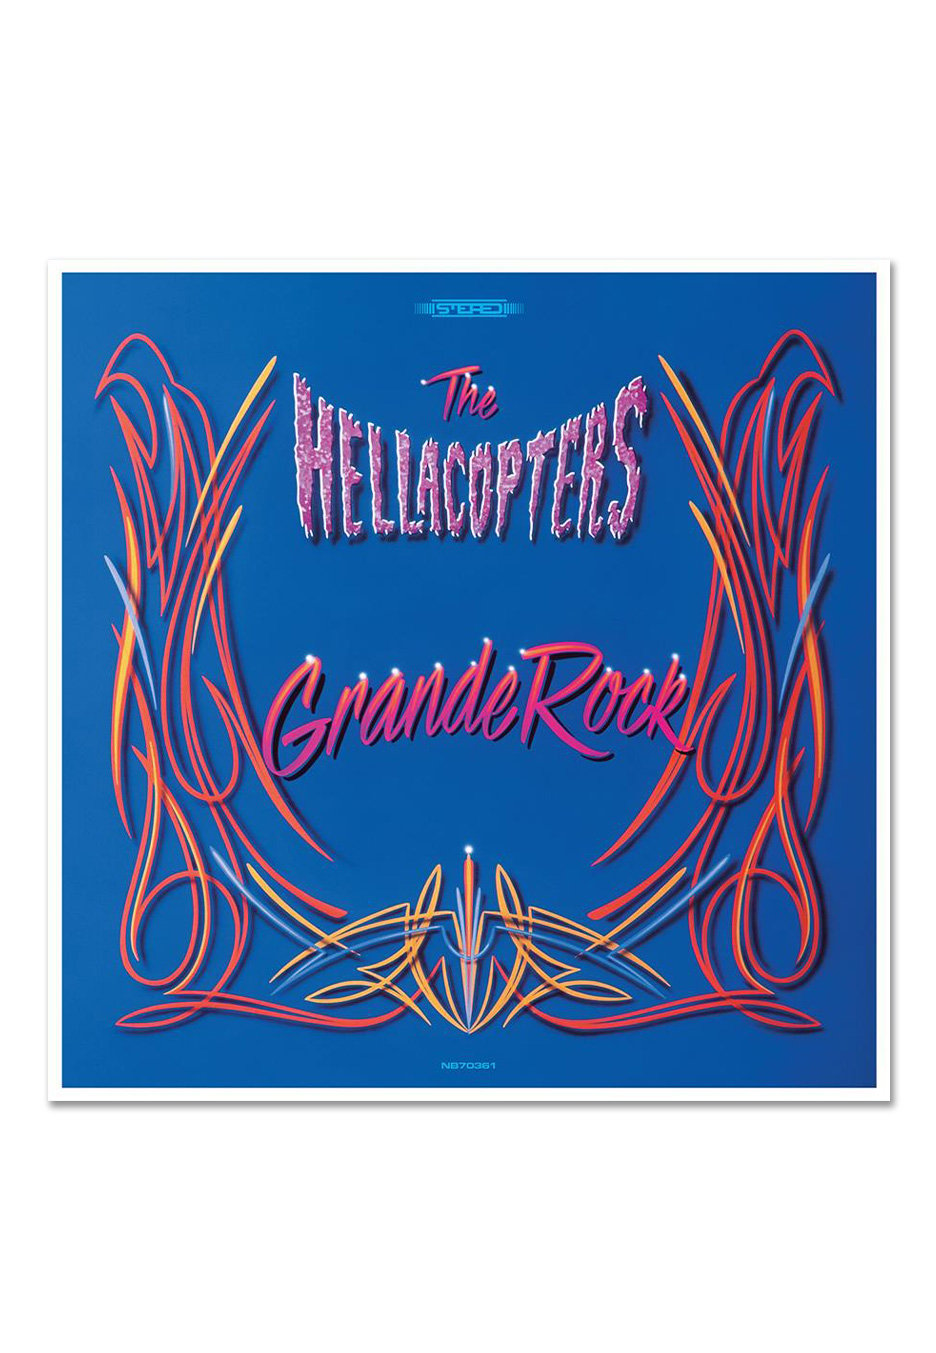 The Hellacopters - Grande Rock Revisited - 2 CD | Neutral-Image